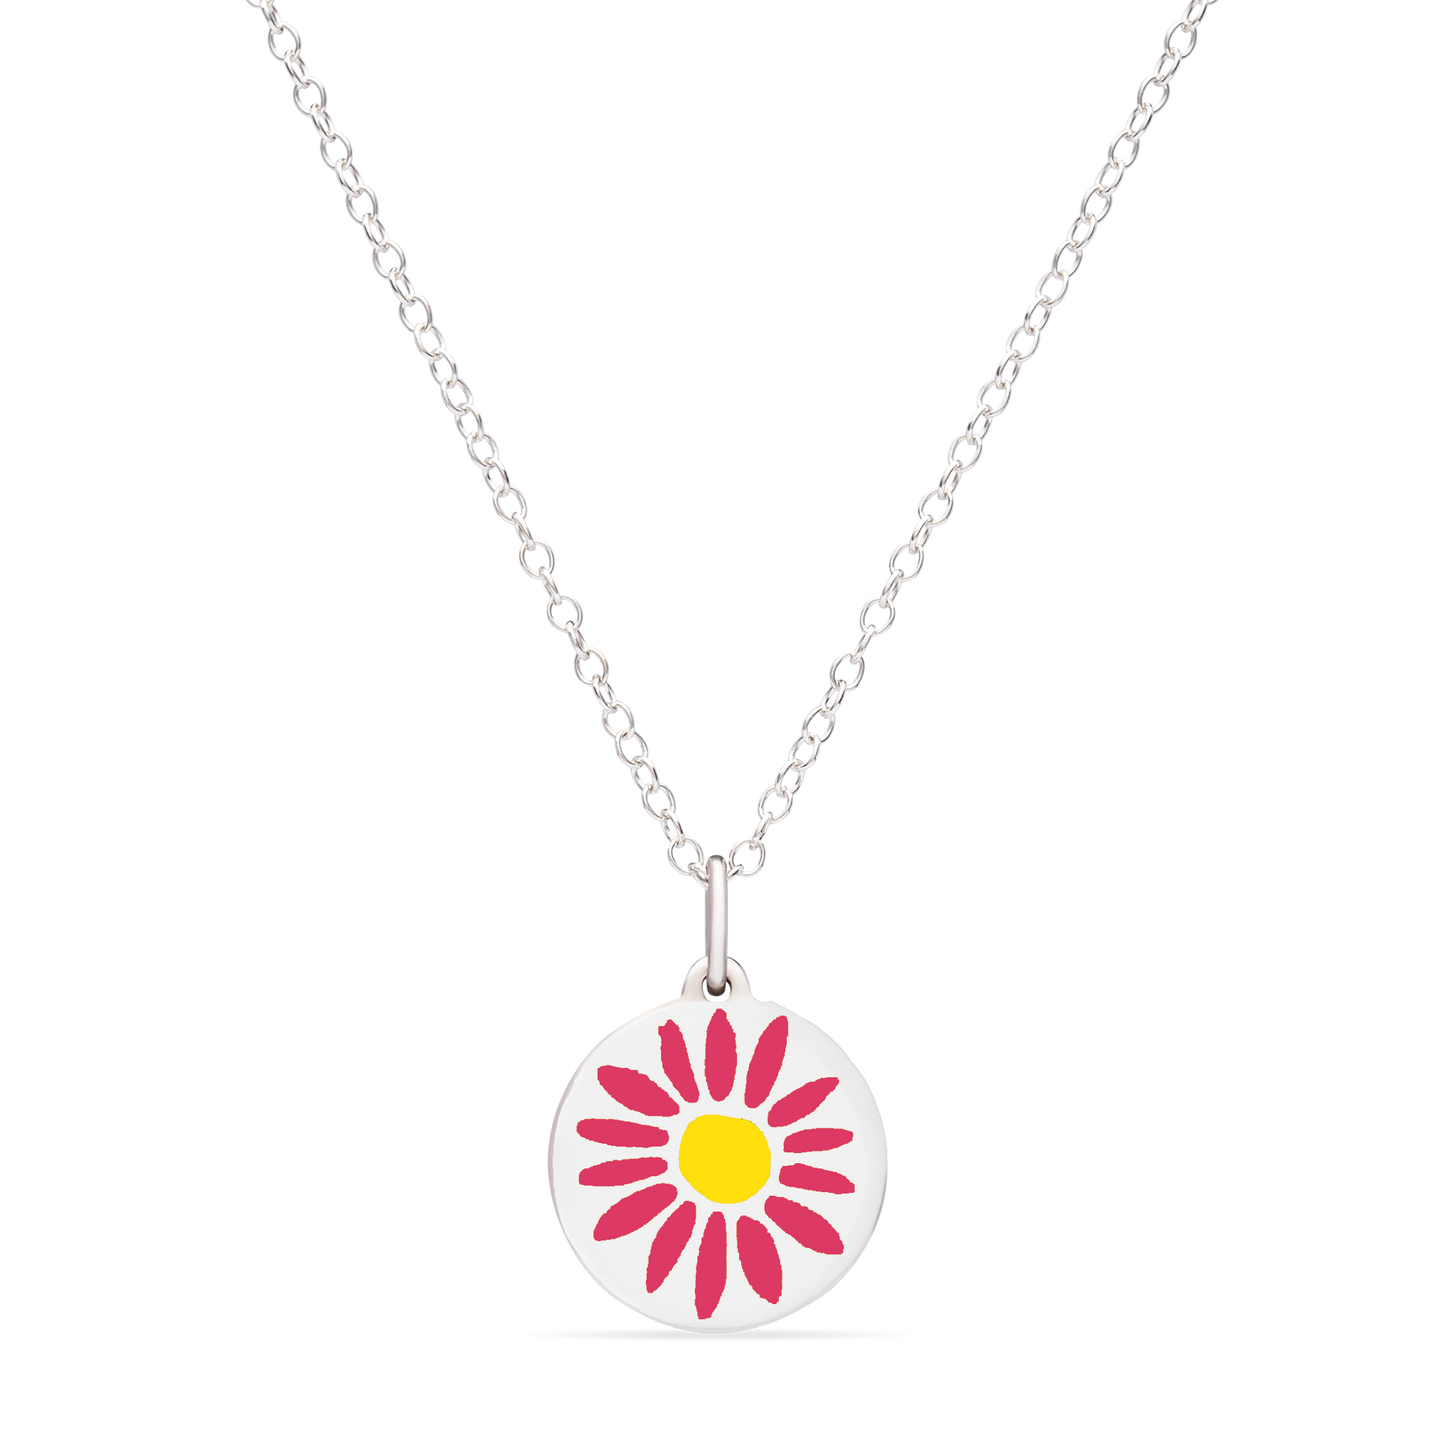 MINI PINK DAISY CHARM sterling silver with rhodium plate